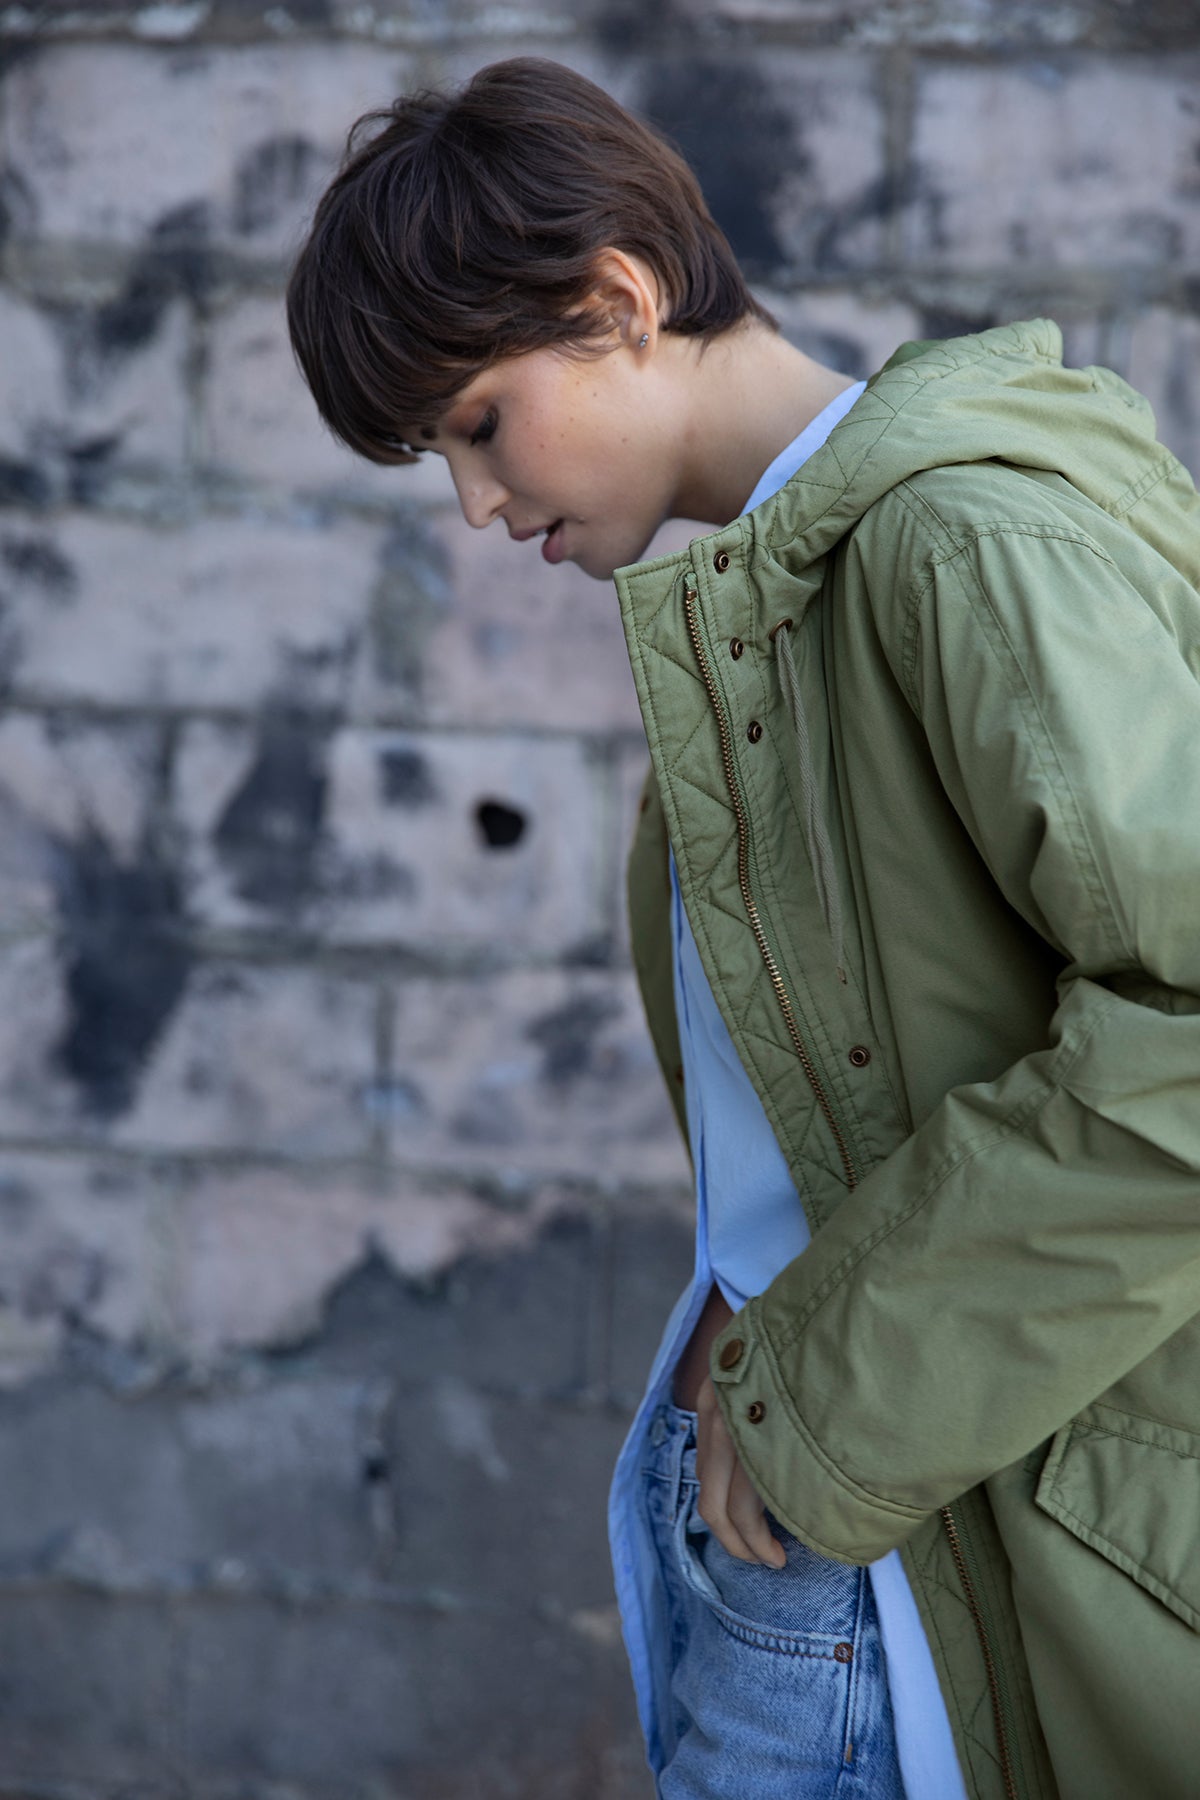 Cheviot Jacket in evergreen layered over Redondo shirt in mist blue side-25315857268929